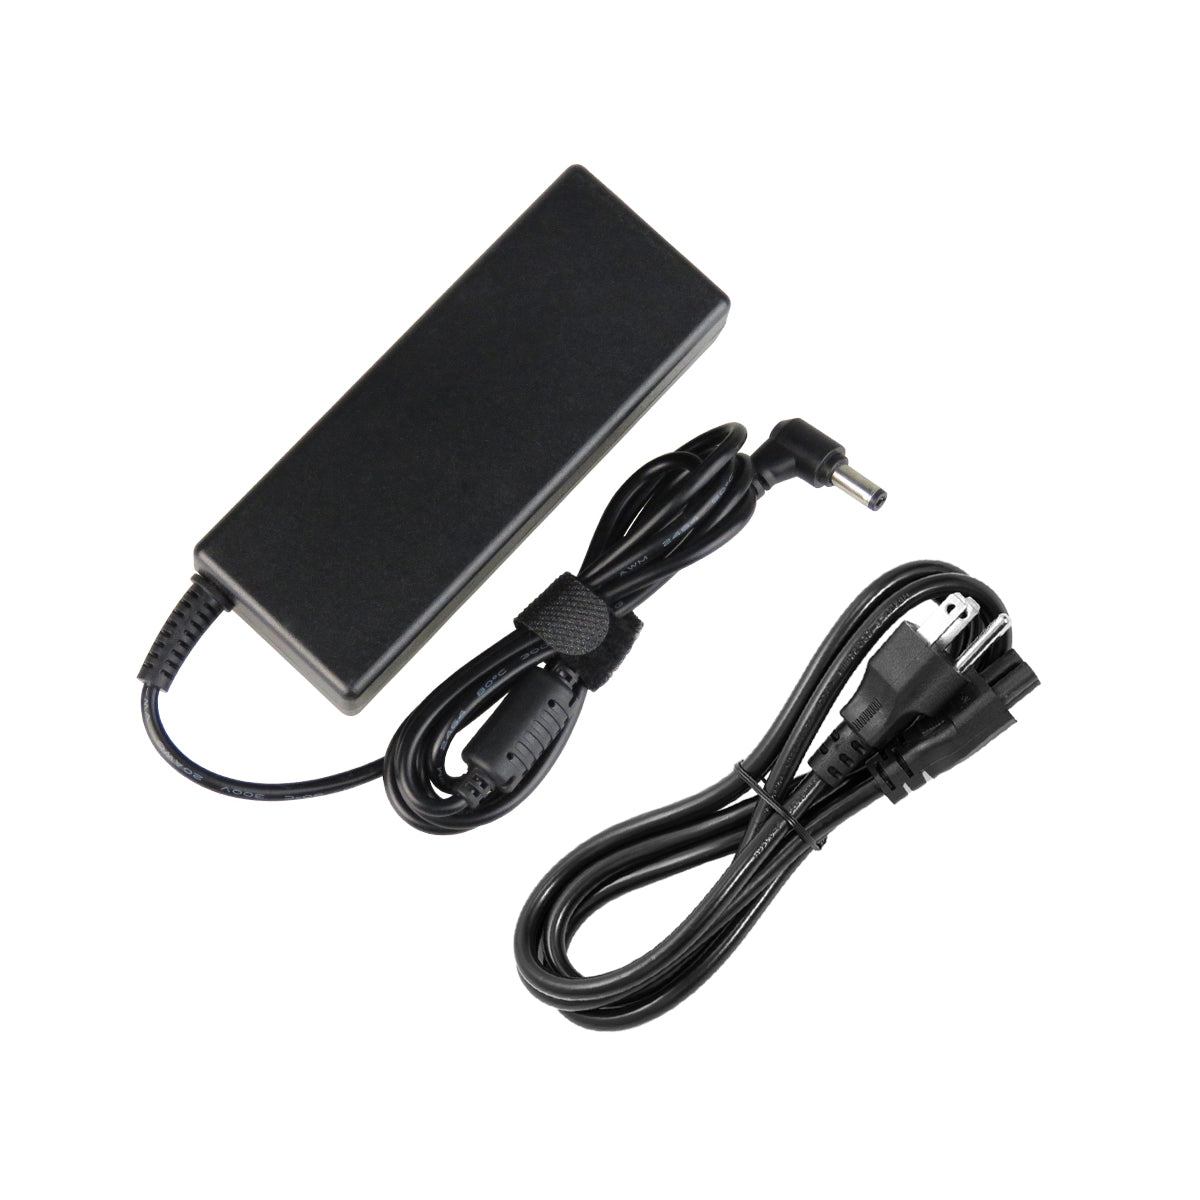 AC Adapter Charger for Toshiba Satellite C855 Notebook.